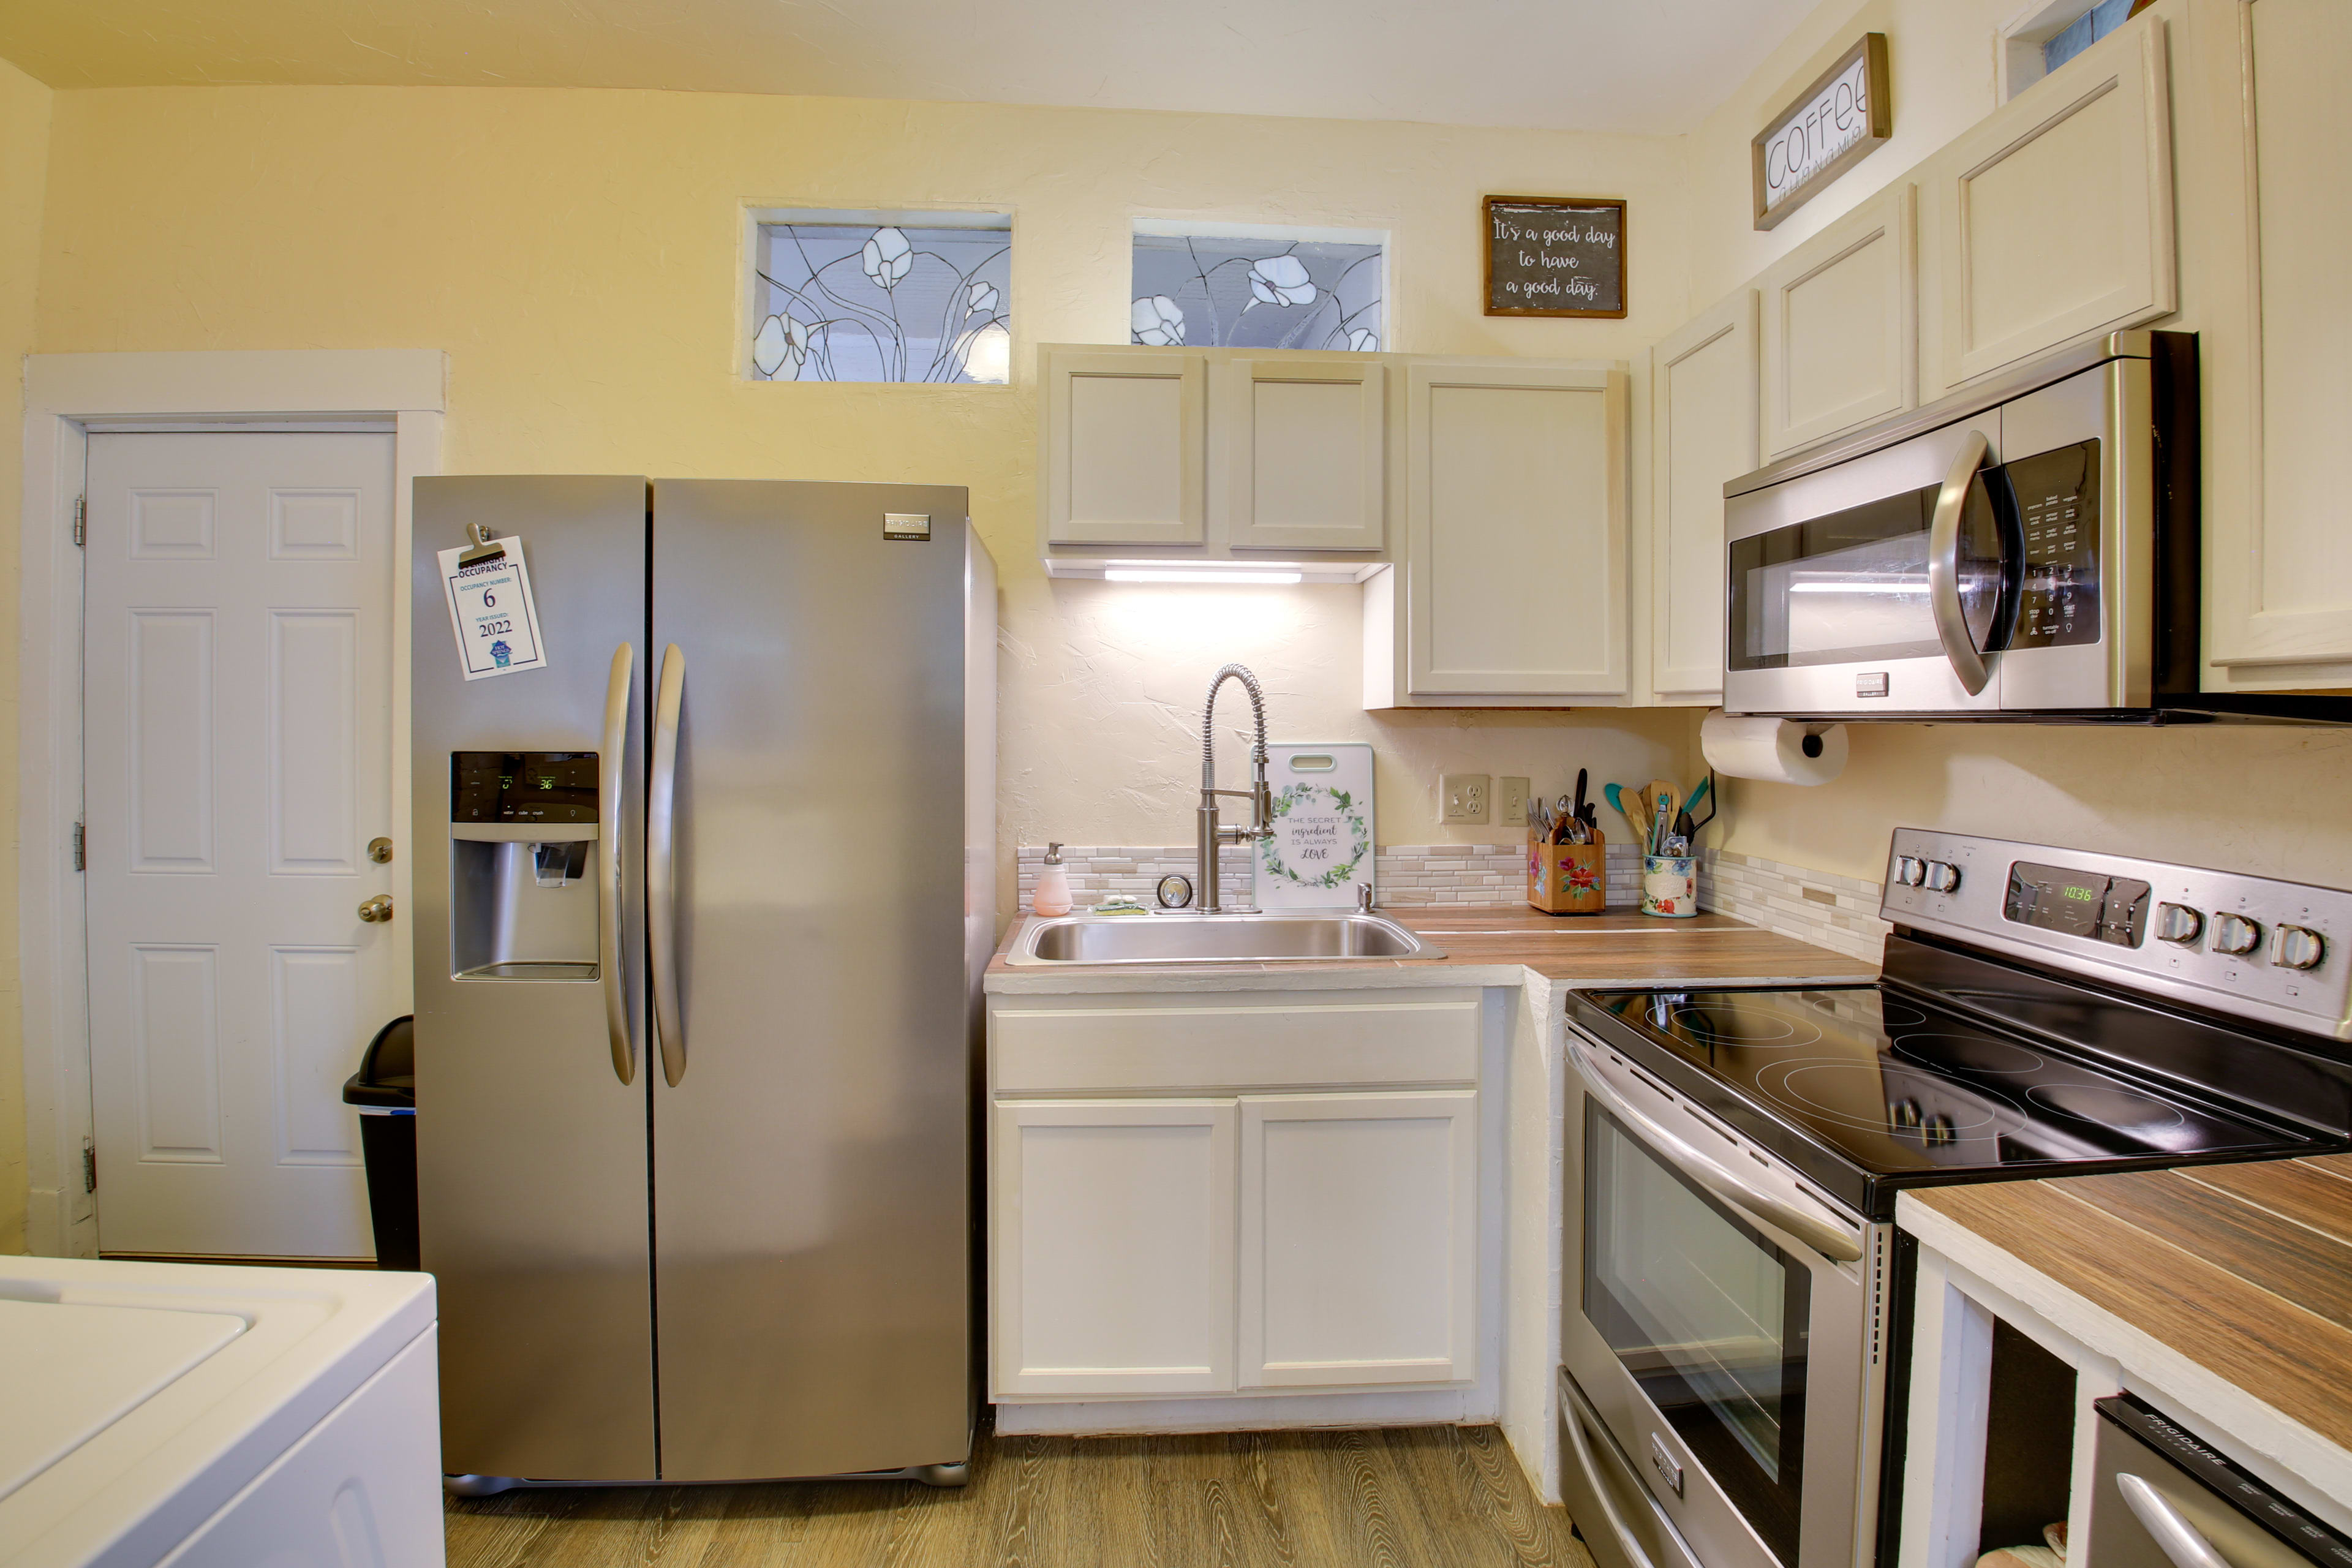 Kitchen | Cooking Basics | Coffee Maker | Paper Towels/Trash Bags Provided